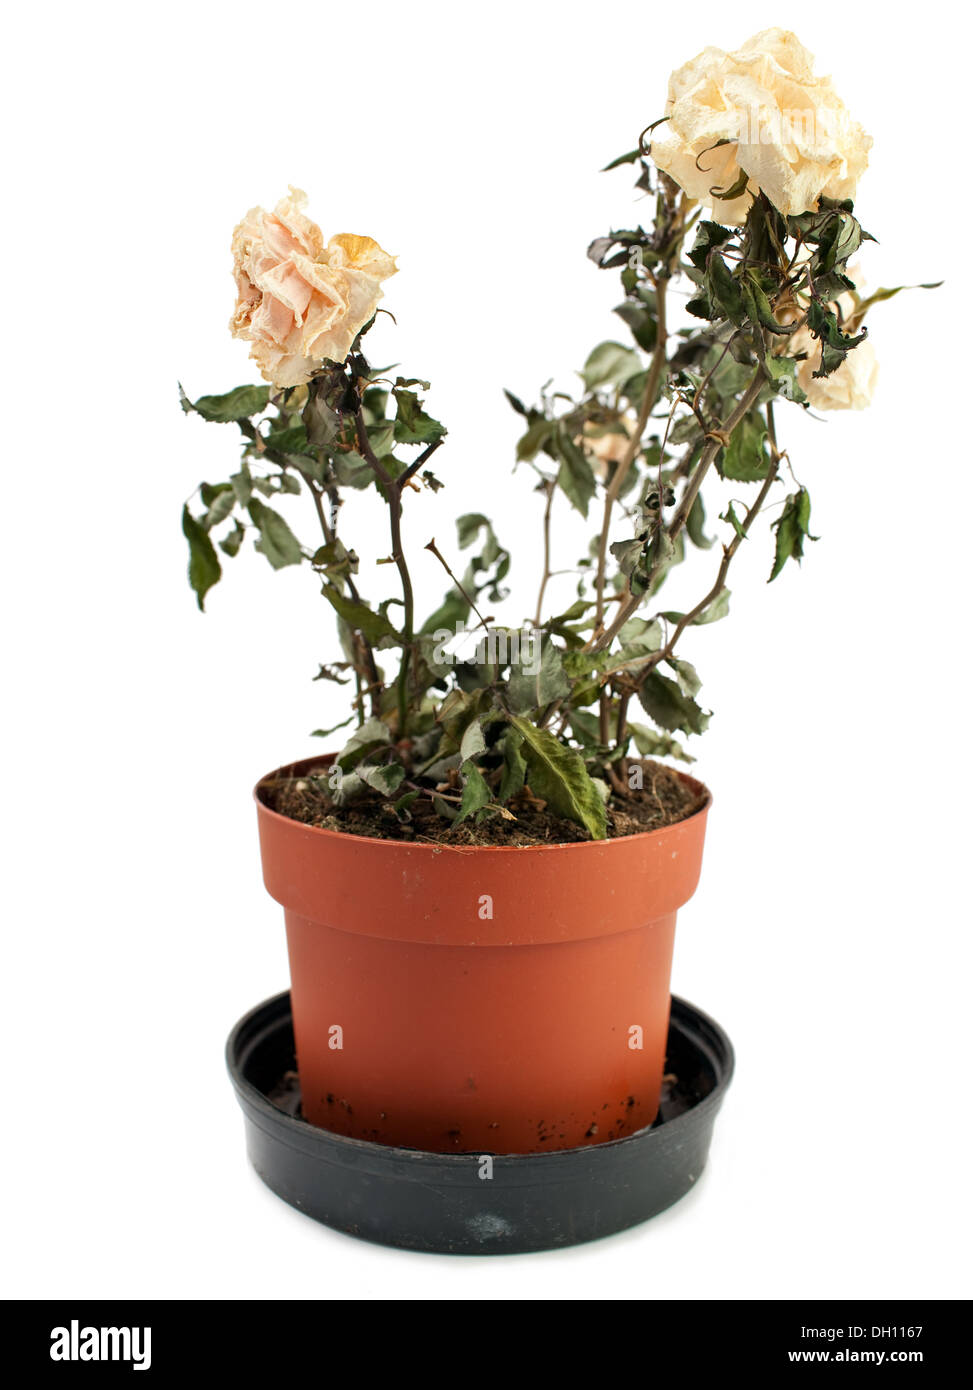 The dried-up, faded rose in a pot Stock Photo